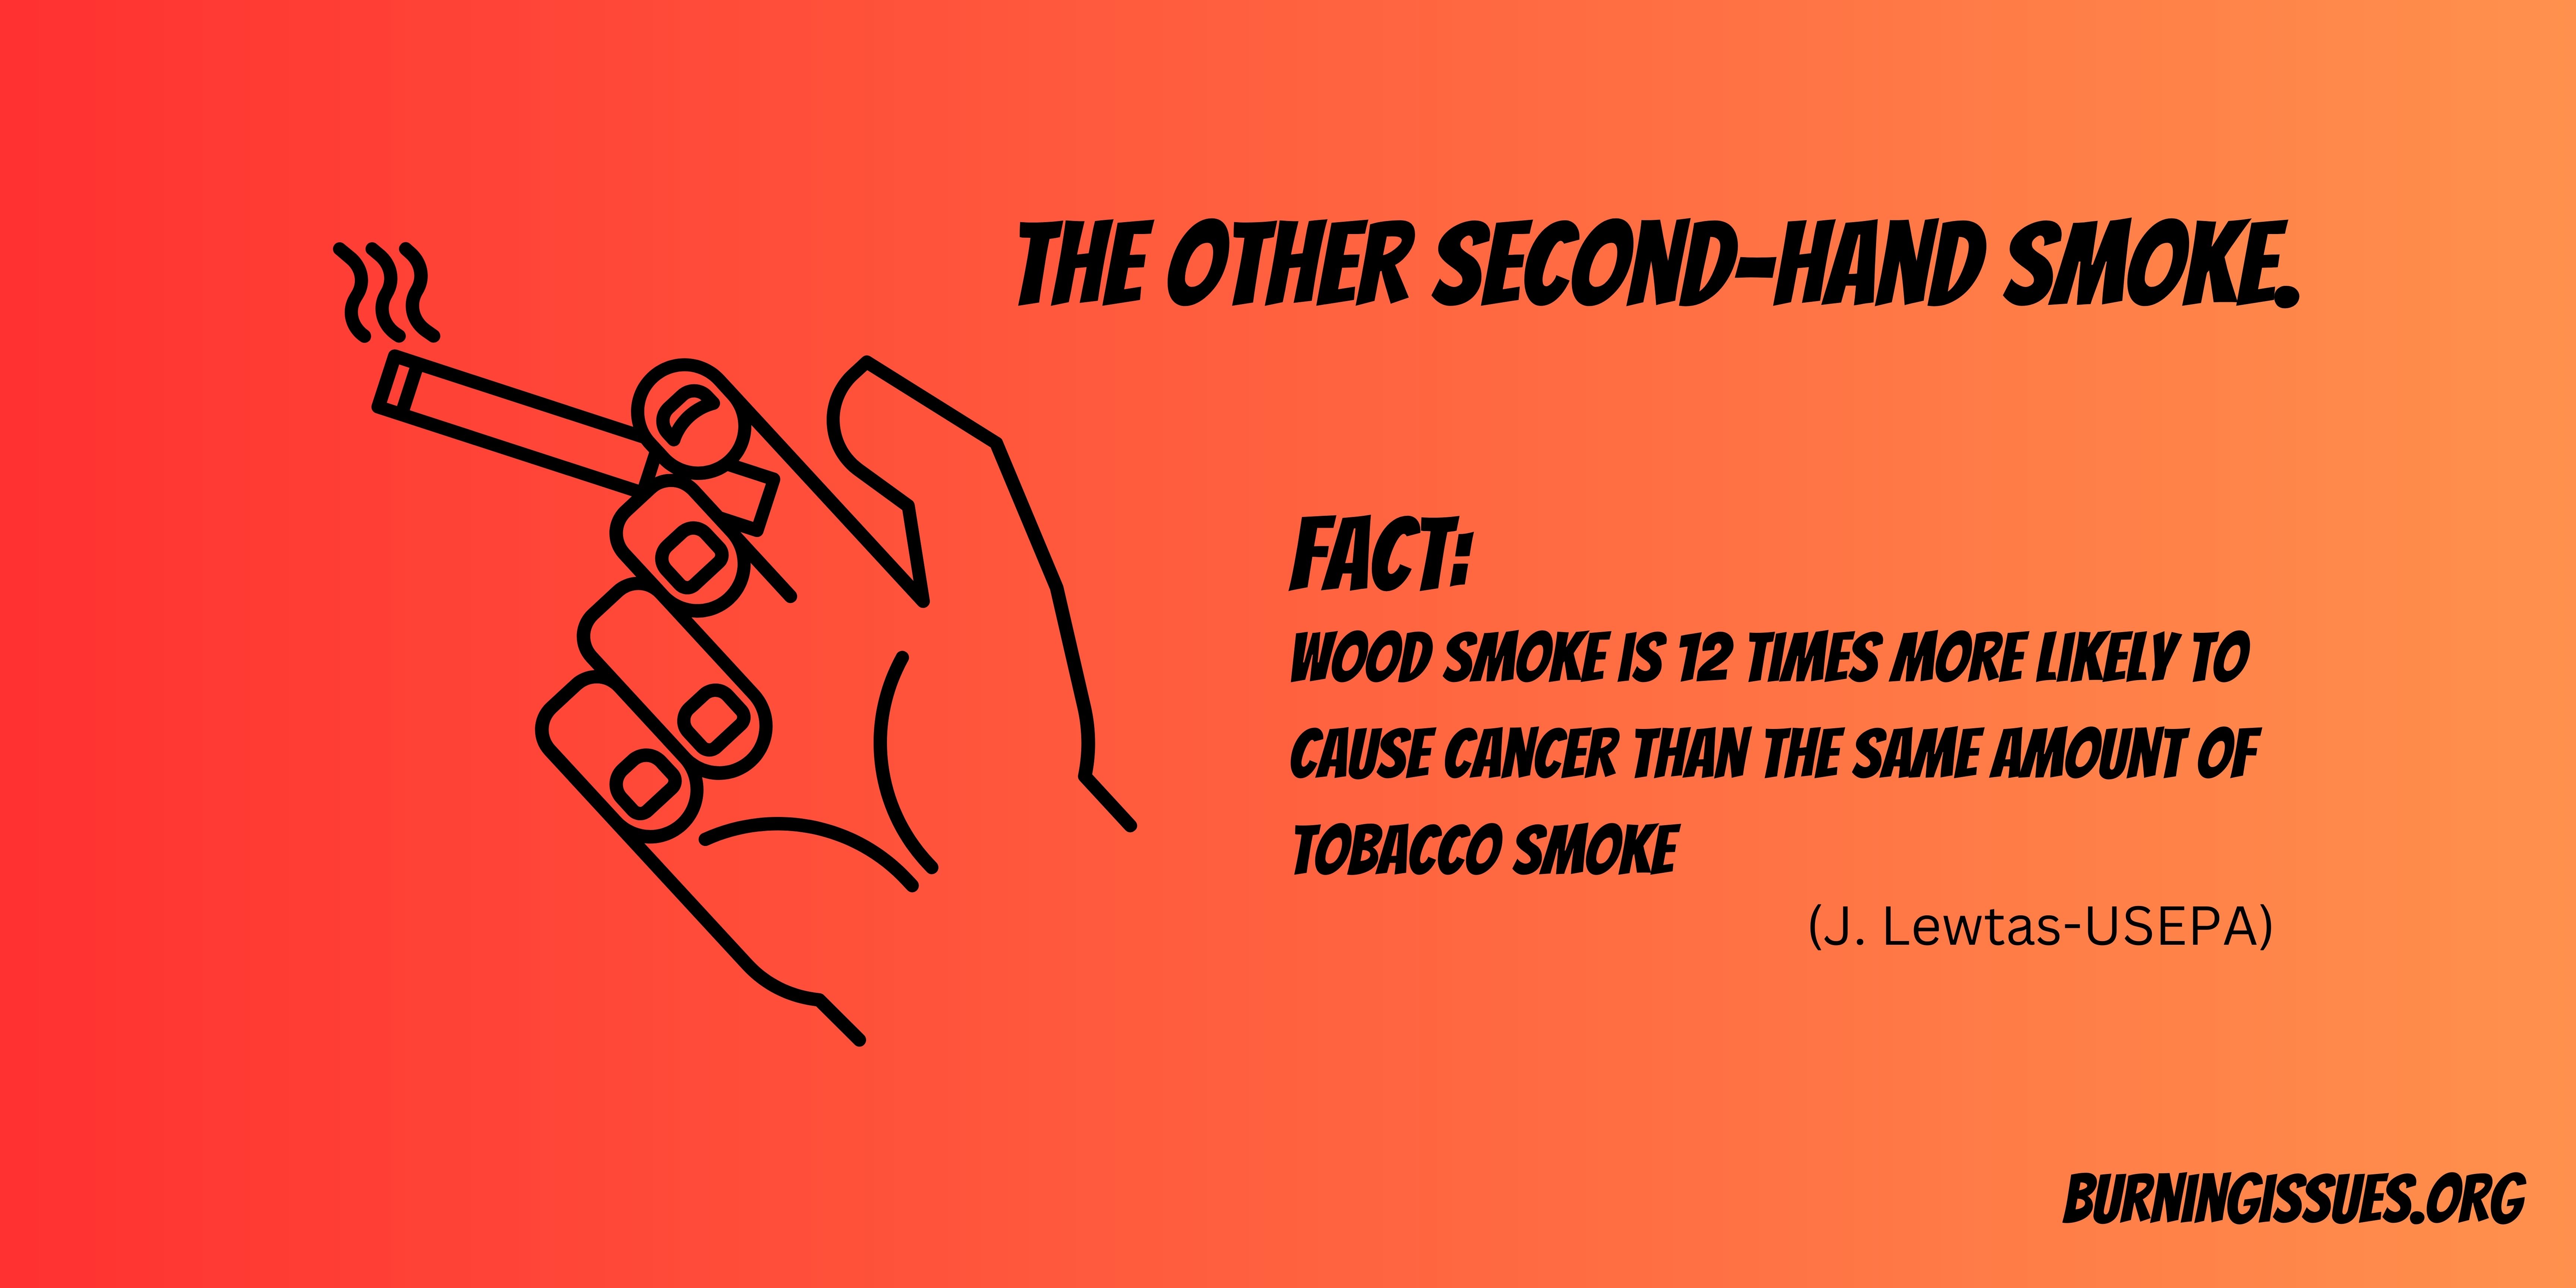 the other second-hand smoke. Fact: Wood smoke is 12 times more likely to cause cancer than the same amount of tobacco smoke. (J. Lewtas-USEPA)